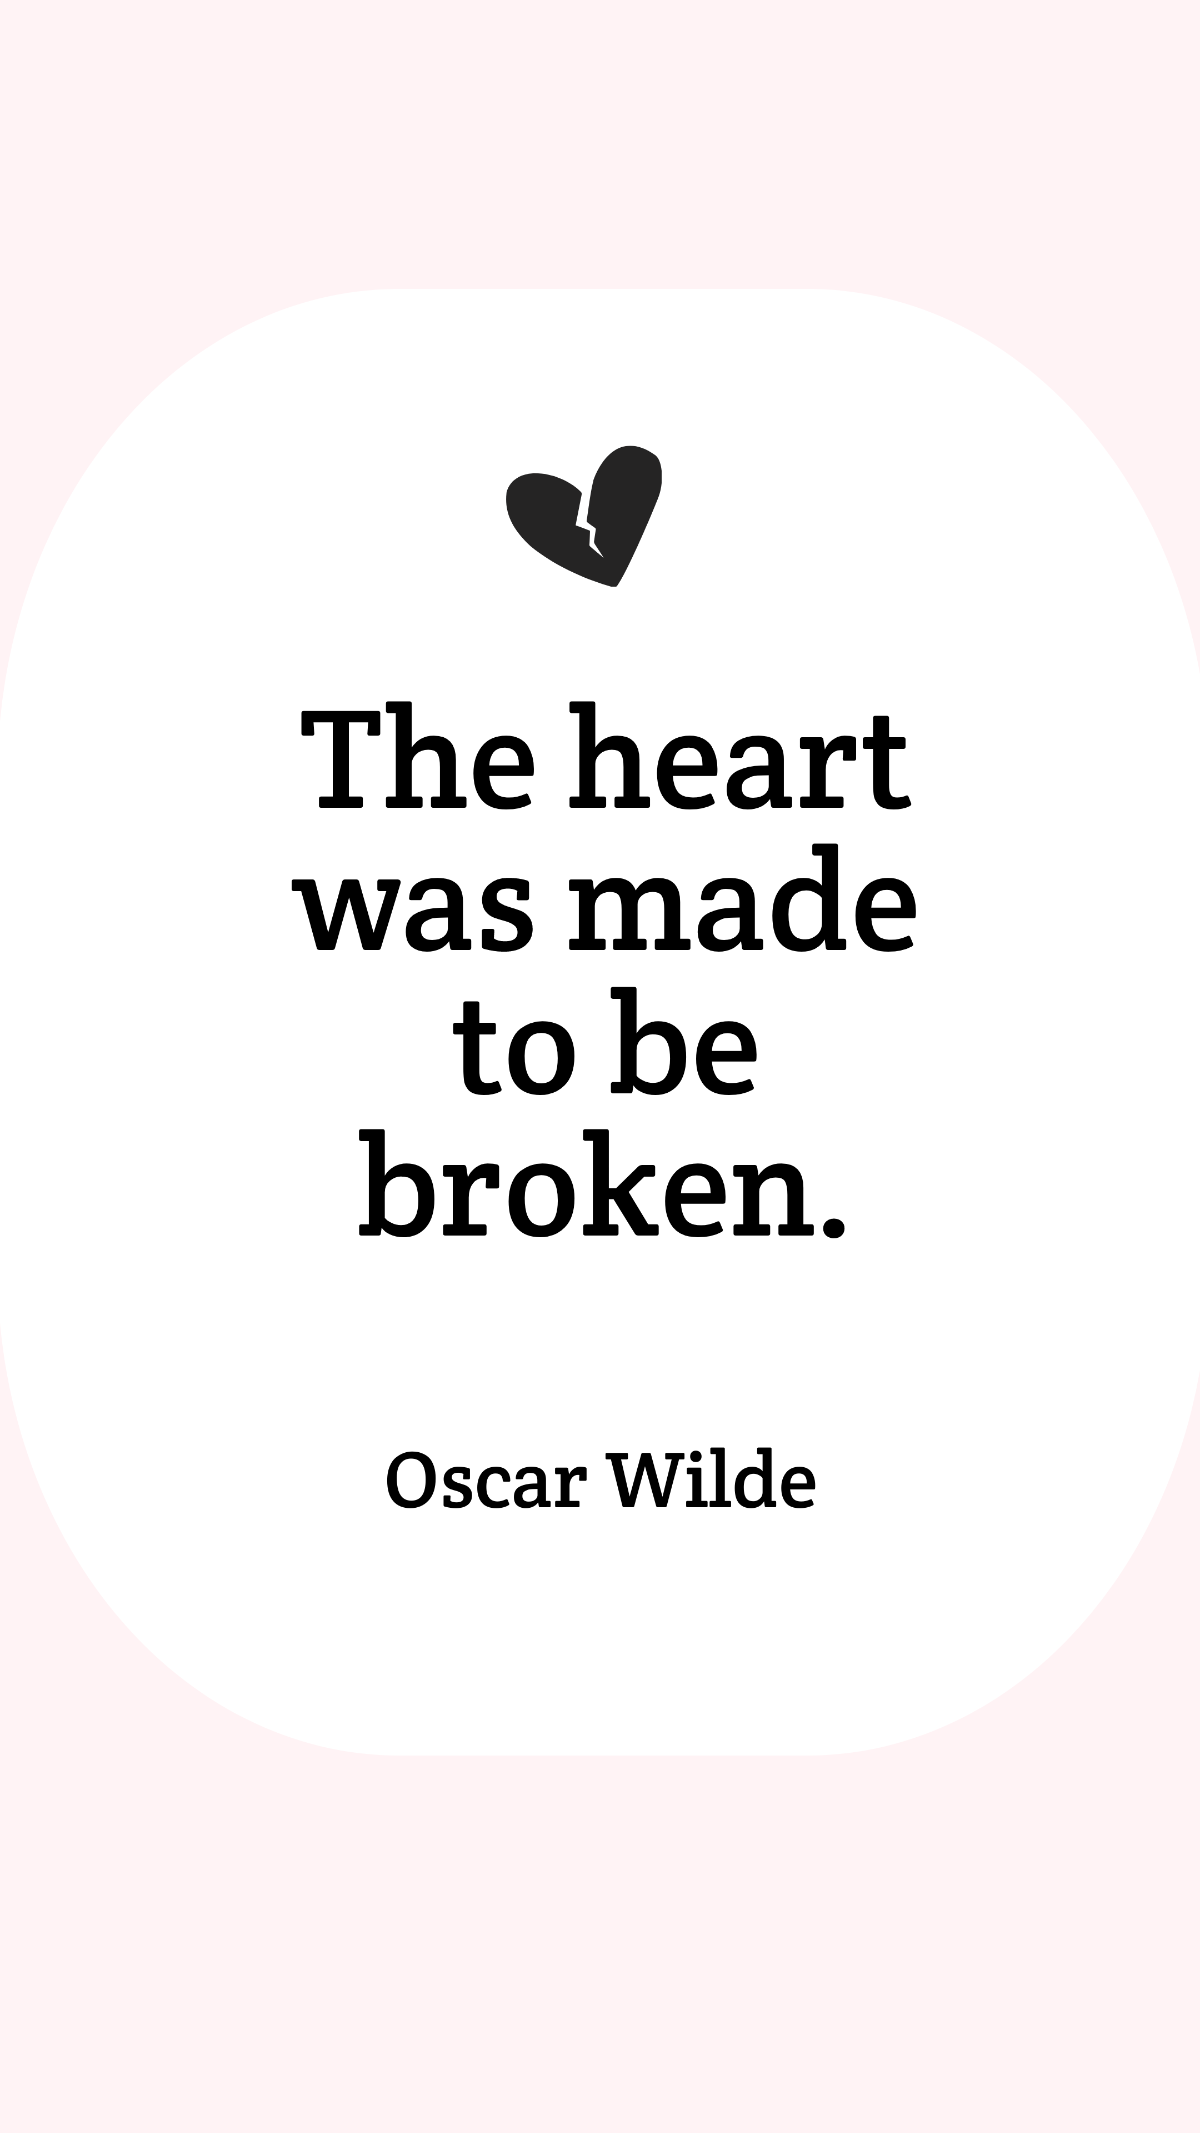 Oscar Wilde - The heart was made to be broken.